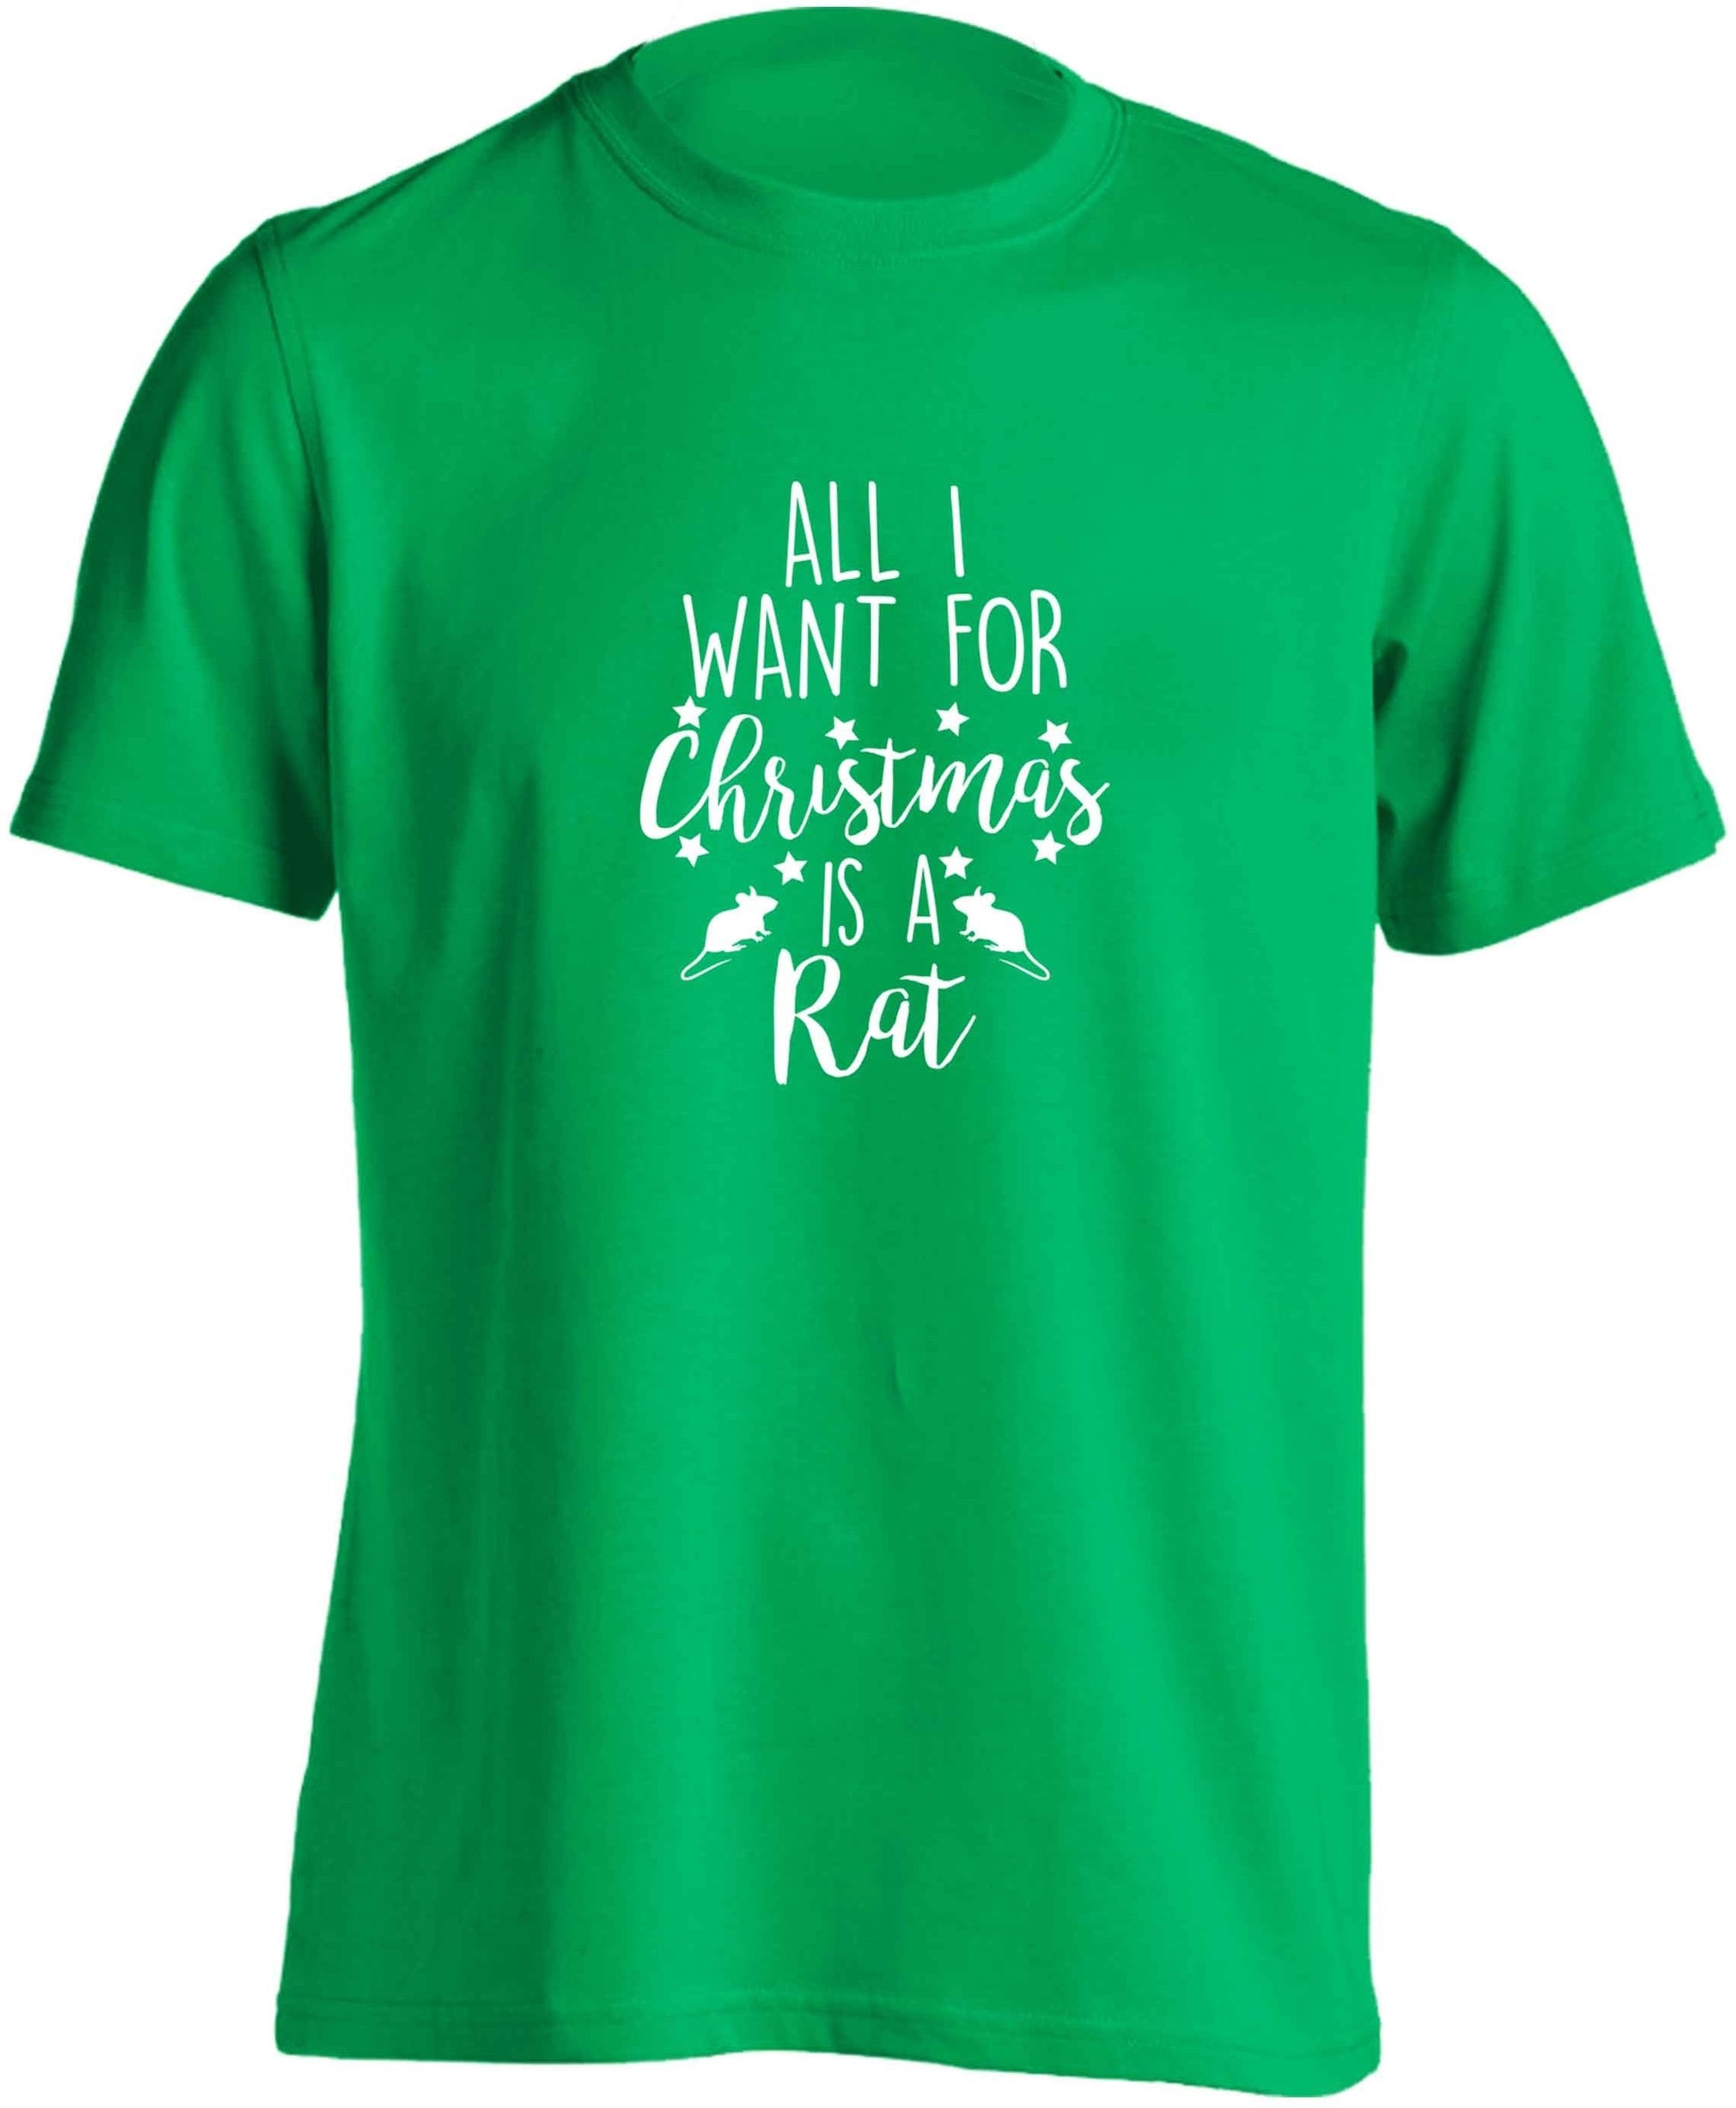 All I want for Christmas is a rat adults unisex green Tshirt 2XL